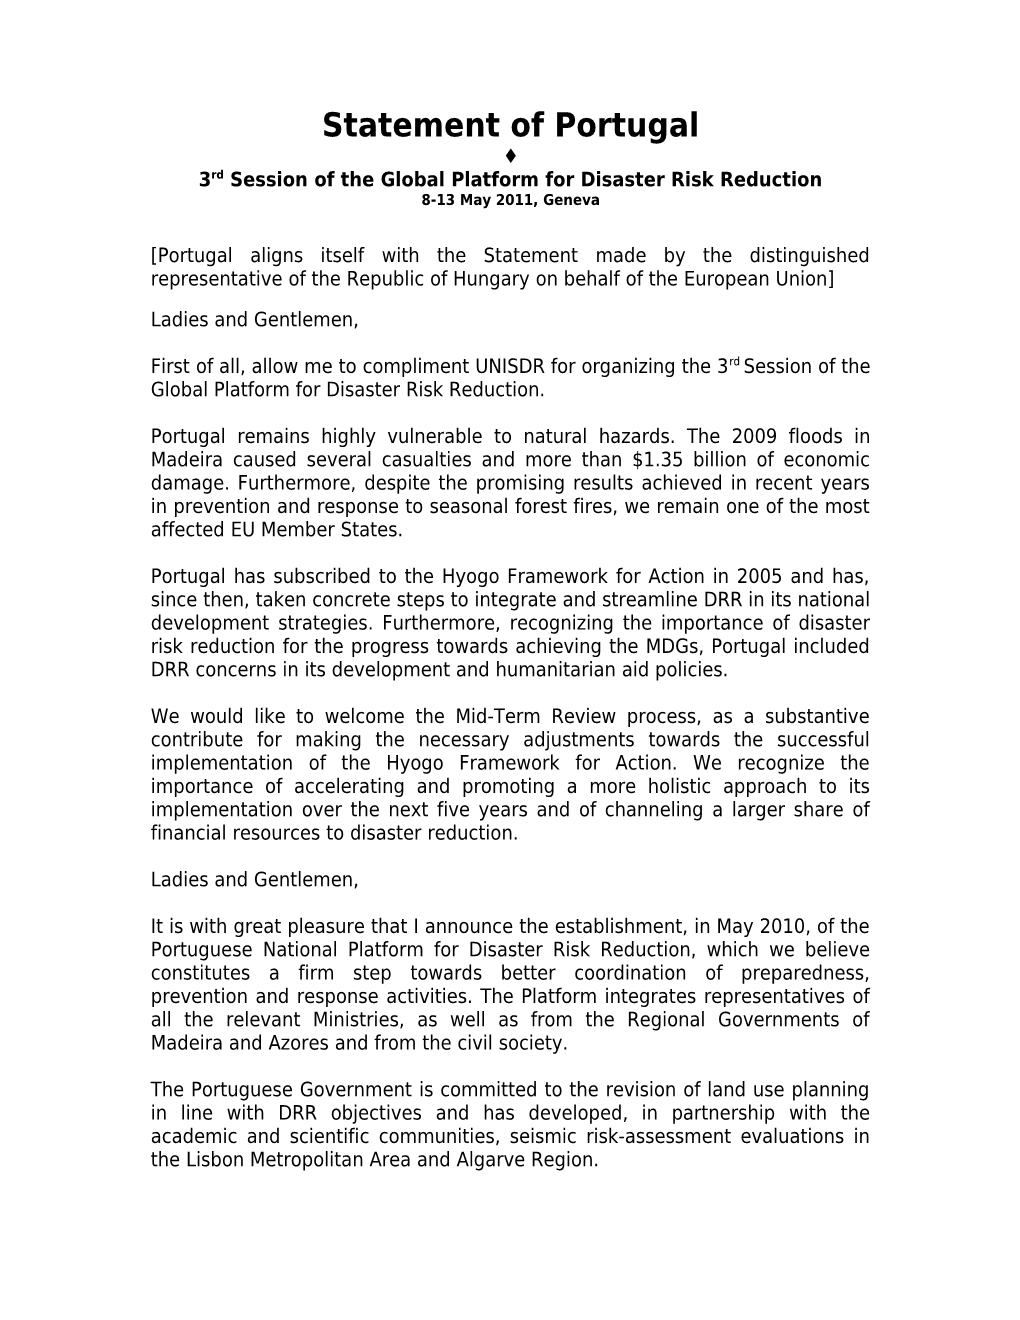 Statement of Portugal on Disaster Risk Reduction